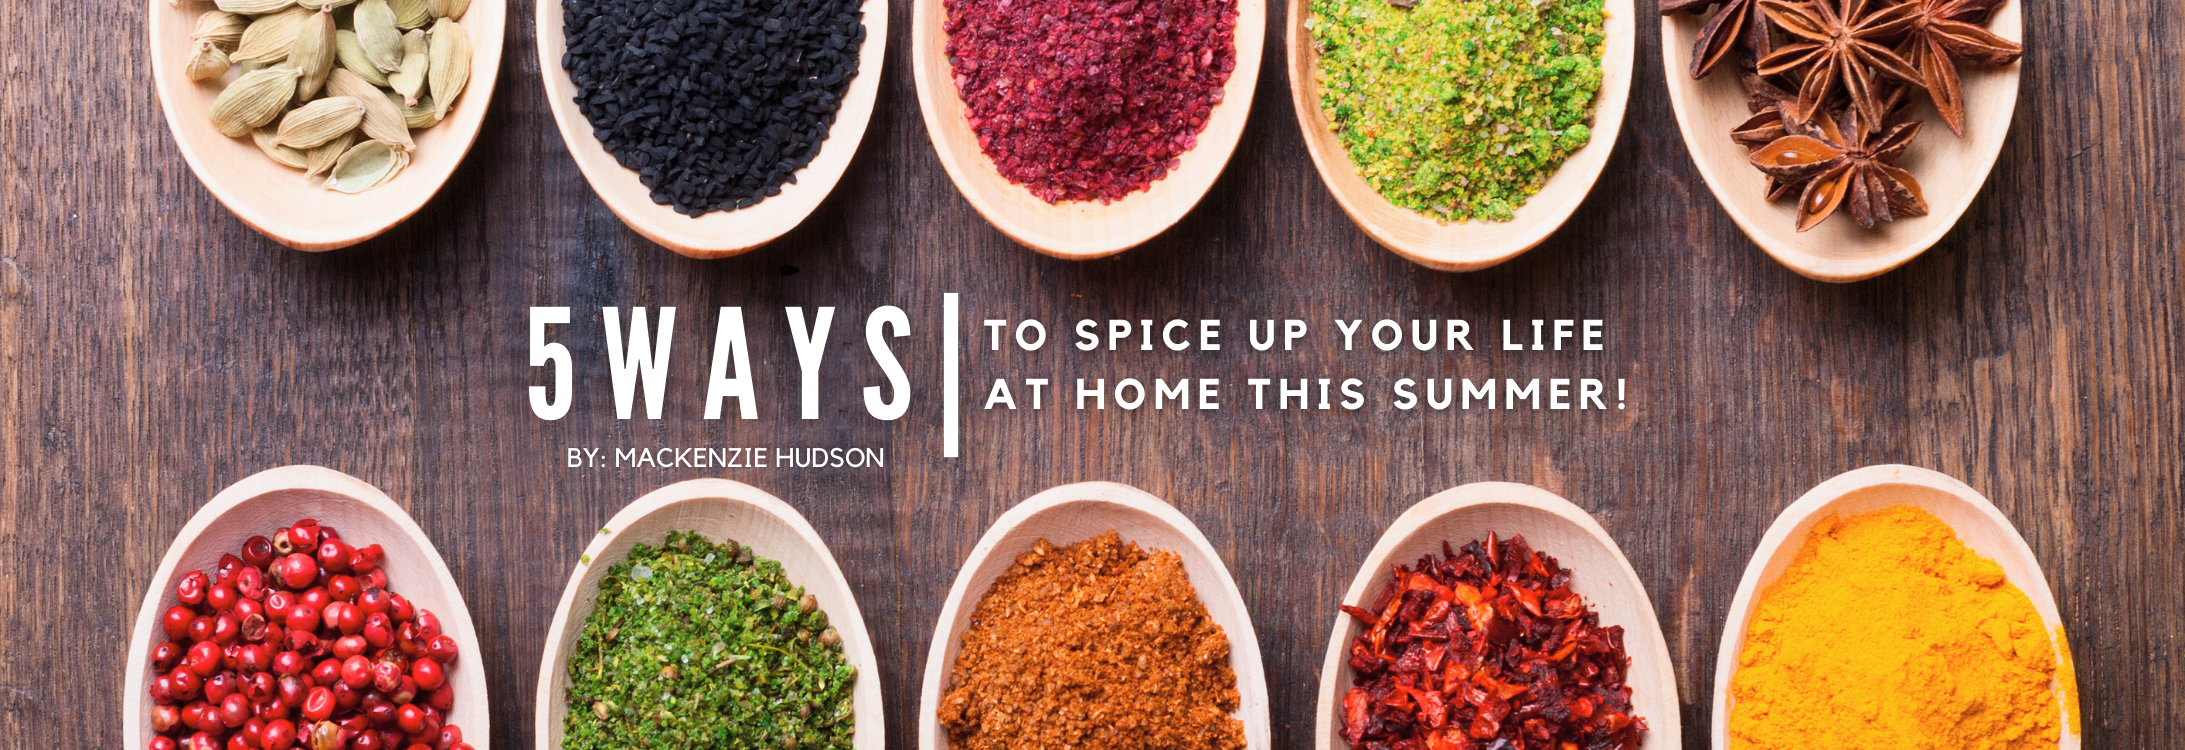 5 Ways to Spice up your Life at Home this Summer blog cover